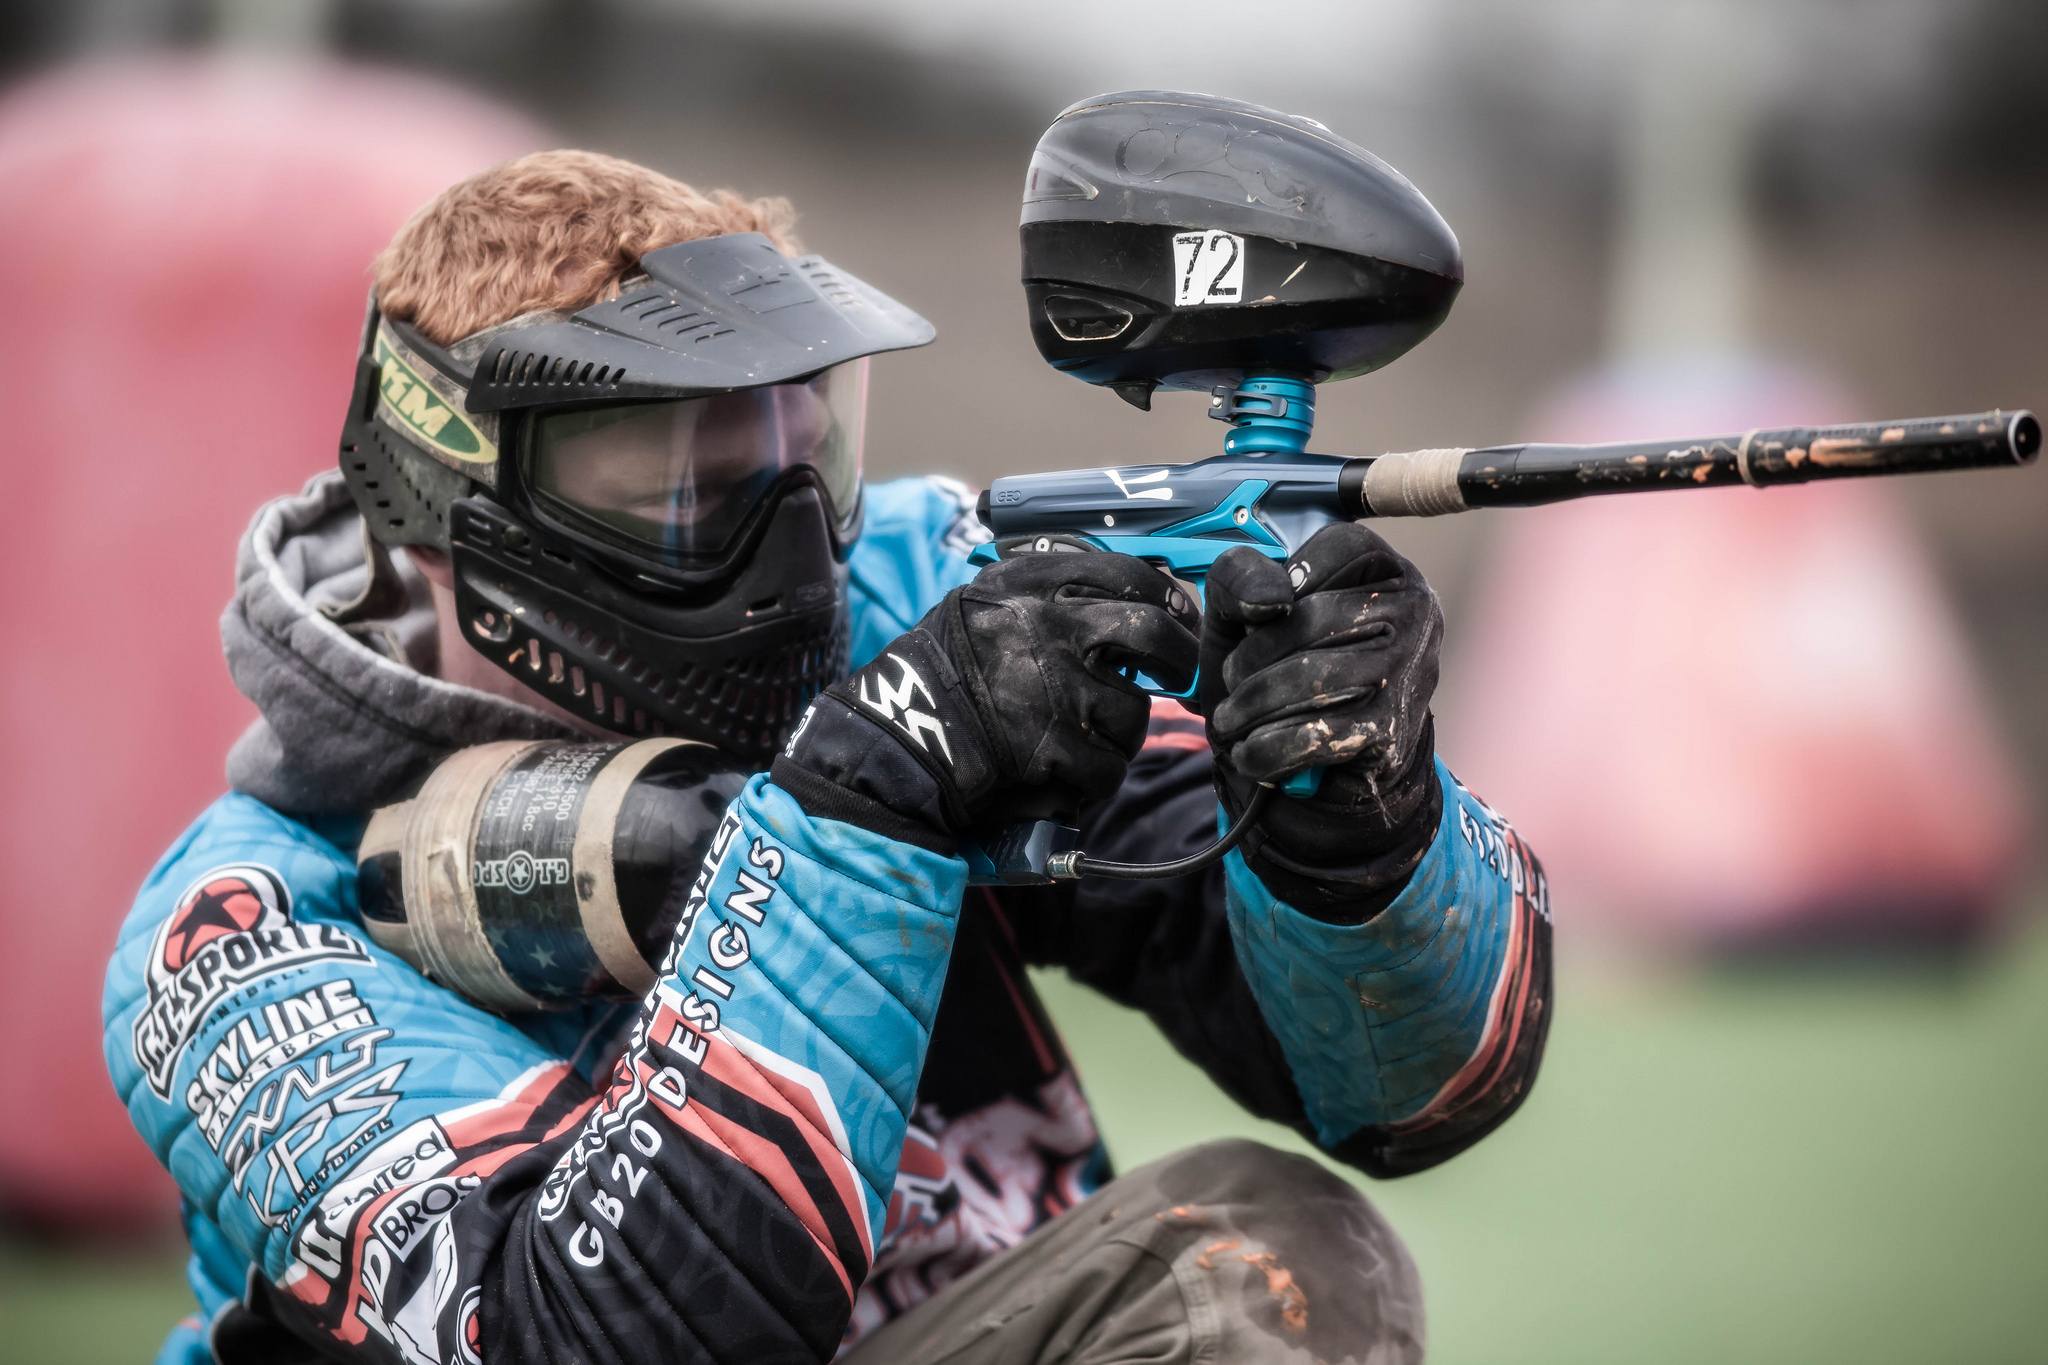 Paintball: The Adrenaline Challenge Of A Lifetime